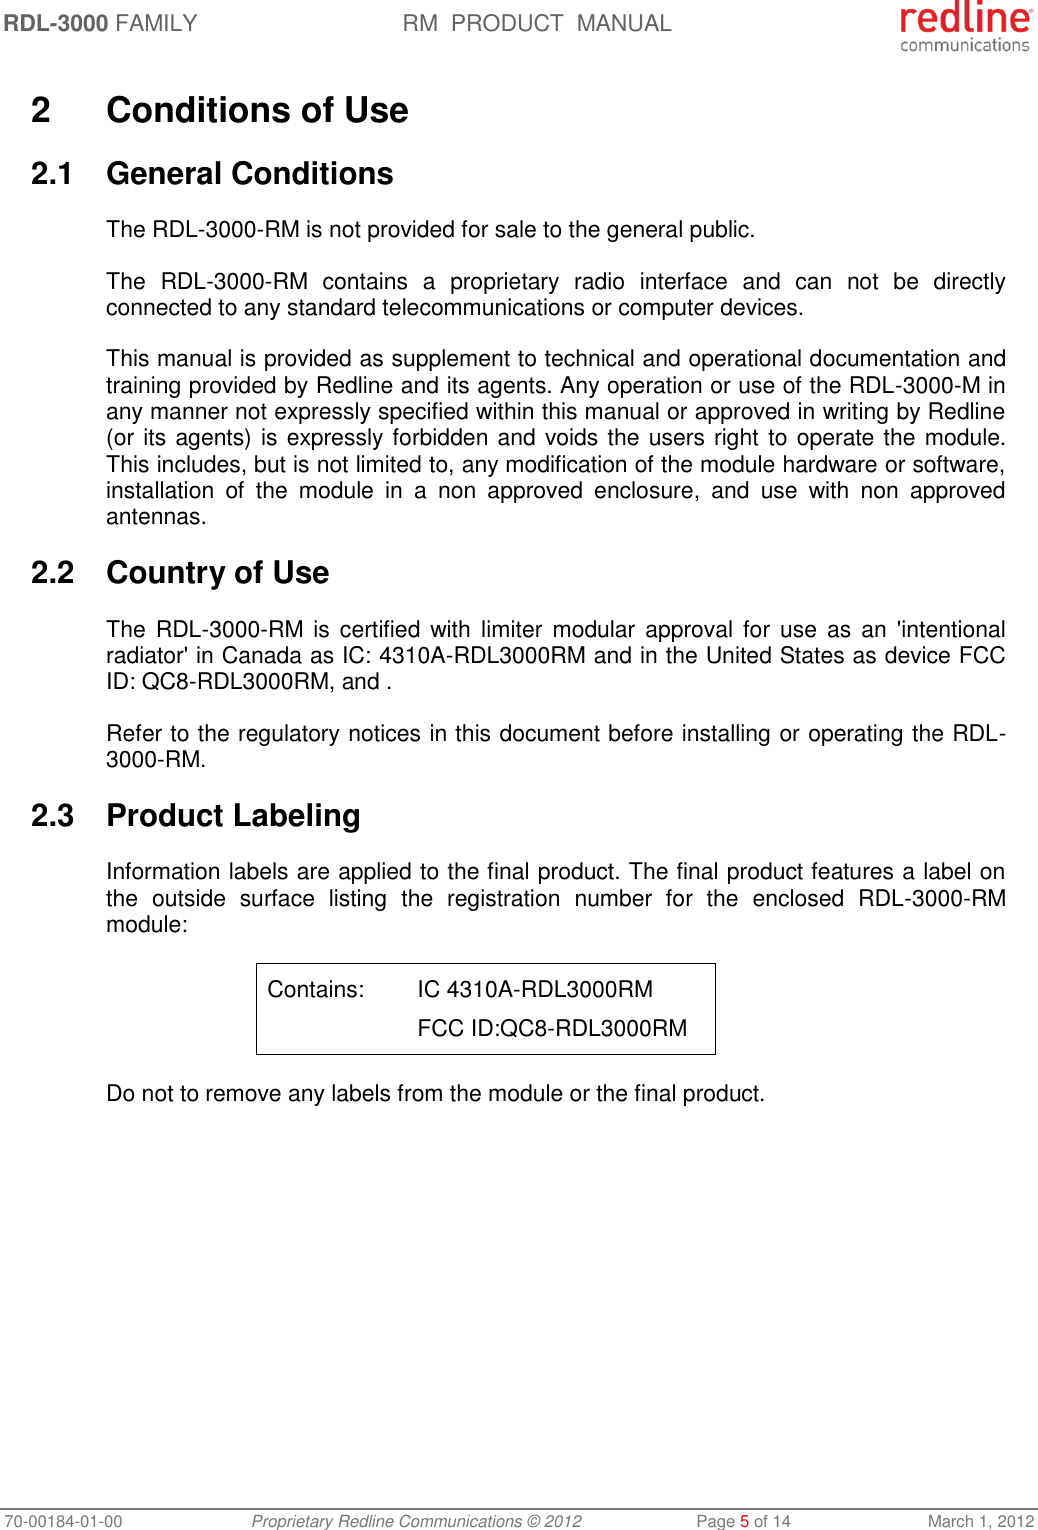 RDL-3000 FAMILY RM  PRODUCT  MANUAL 70-00184-01-00 Proprietary Redline Communications © 2012  Page 5 of 14  March 1, 2012  2  Conditions of Use 2.1  General Conditions The RDL-3000-RM is not provided for sale to the general public.  The  RDL-3000-RM  contains  a  proprietary  radio  interface  and  can  not  be  directly connected to any standard telecommunications or computer devices.  This manual is provided as supplement to technical and operational documentation and training provided by Redline and its agents. Any operation or use of the RDL-3000-M in any manner not expressly specified within this manual or approved in writing by Redline (or its agents) is expressly forbidden and voids the users right to operate the module.  This includes, but is not limited to, any modification of the module hardware or software, installation  of  the  module  in  a  non  approved  enclosure,  and  use  with  non  approved antennas. 2.2  Country of Use The  RDL-3000-RM is certified  with  limiter  modular approval  for  use  as  an  &apos;intentional radiator&apos; in Canada as IC: 4310A-RDL3000RM and in the United States as device FCC ID: QC8-RDL3000RM, and . Refer to the regulatory notices in this document before installing or operating the RDL-3000-RM. 2.3  Product Labeling Information labels are applied to the final product. The final product features a label on the  outside  surface  listing  the  registration  number  for  the  enclosed  RDL-3000-RM module: Contains:  IC 4310A-RDL3000RM     FCC ID:QC8-RDL3000RM Do not to remove any labels from the module or the final product. 